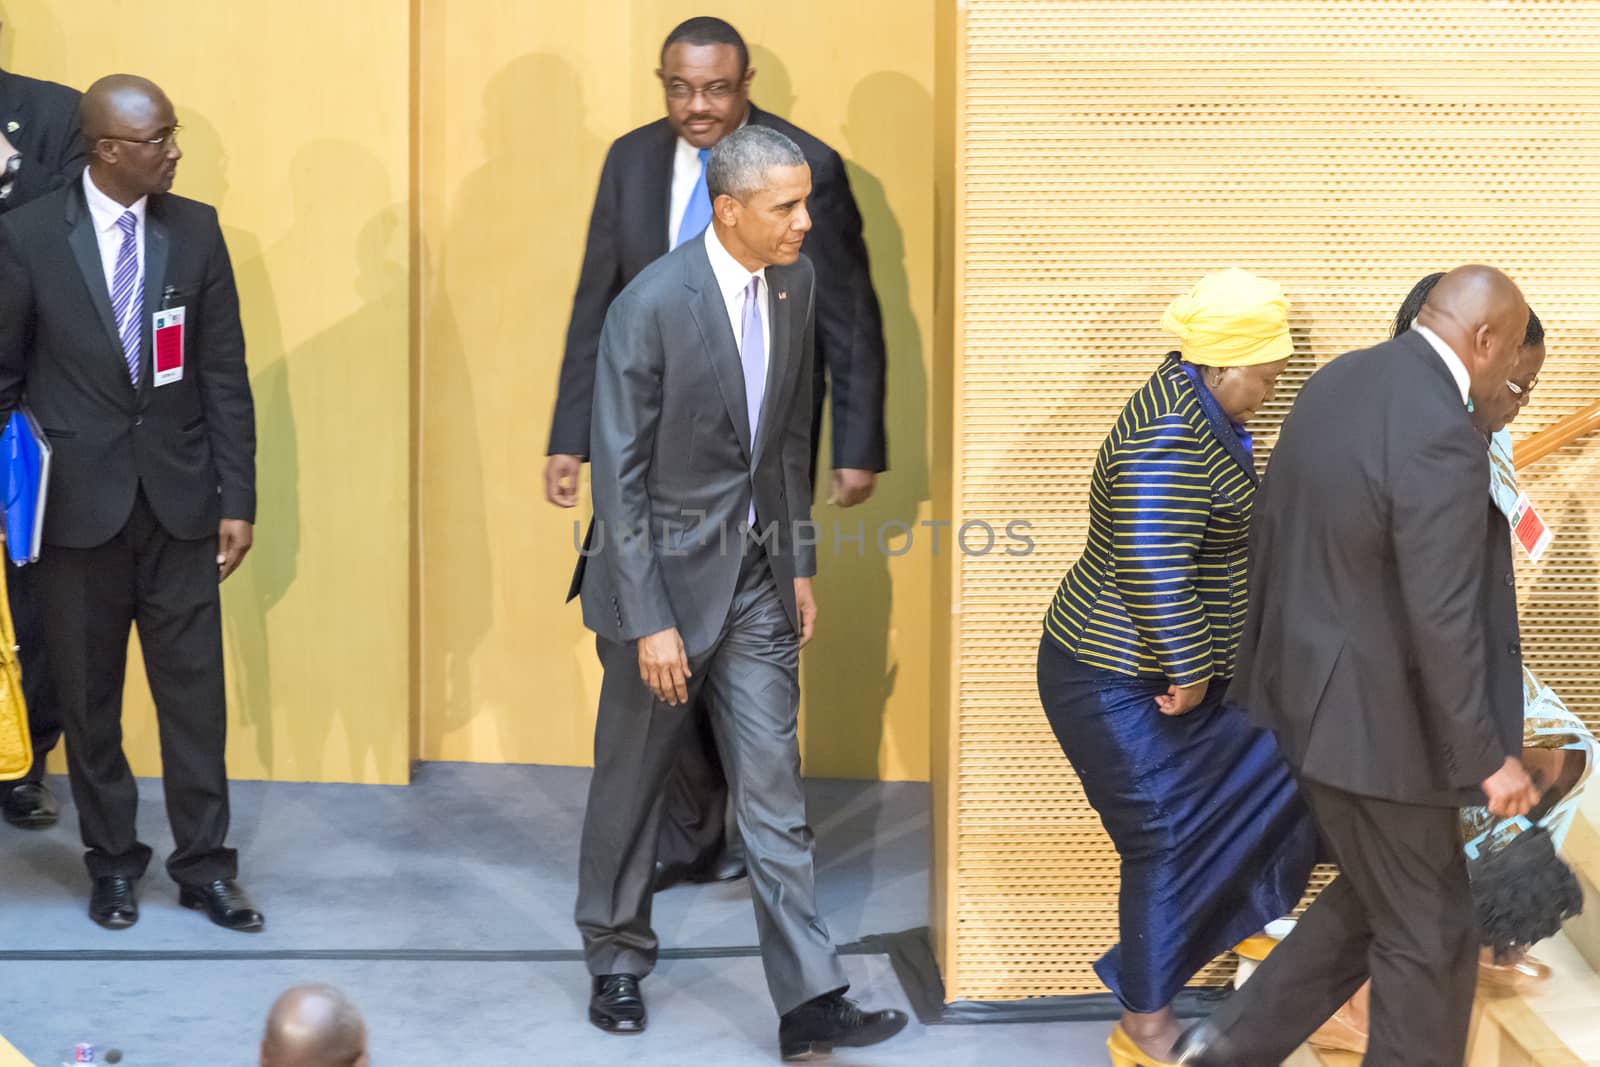 Addis Ababa - July 28: President Obama enters the Nelson Mandela Hall of the AU Conference Centre, to deliver a keynote speech to the African continent and its leaders, on July 28, 2015, at the in Addis Ababa, Ethiopia.